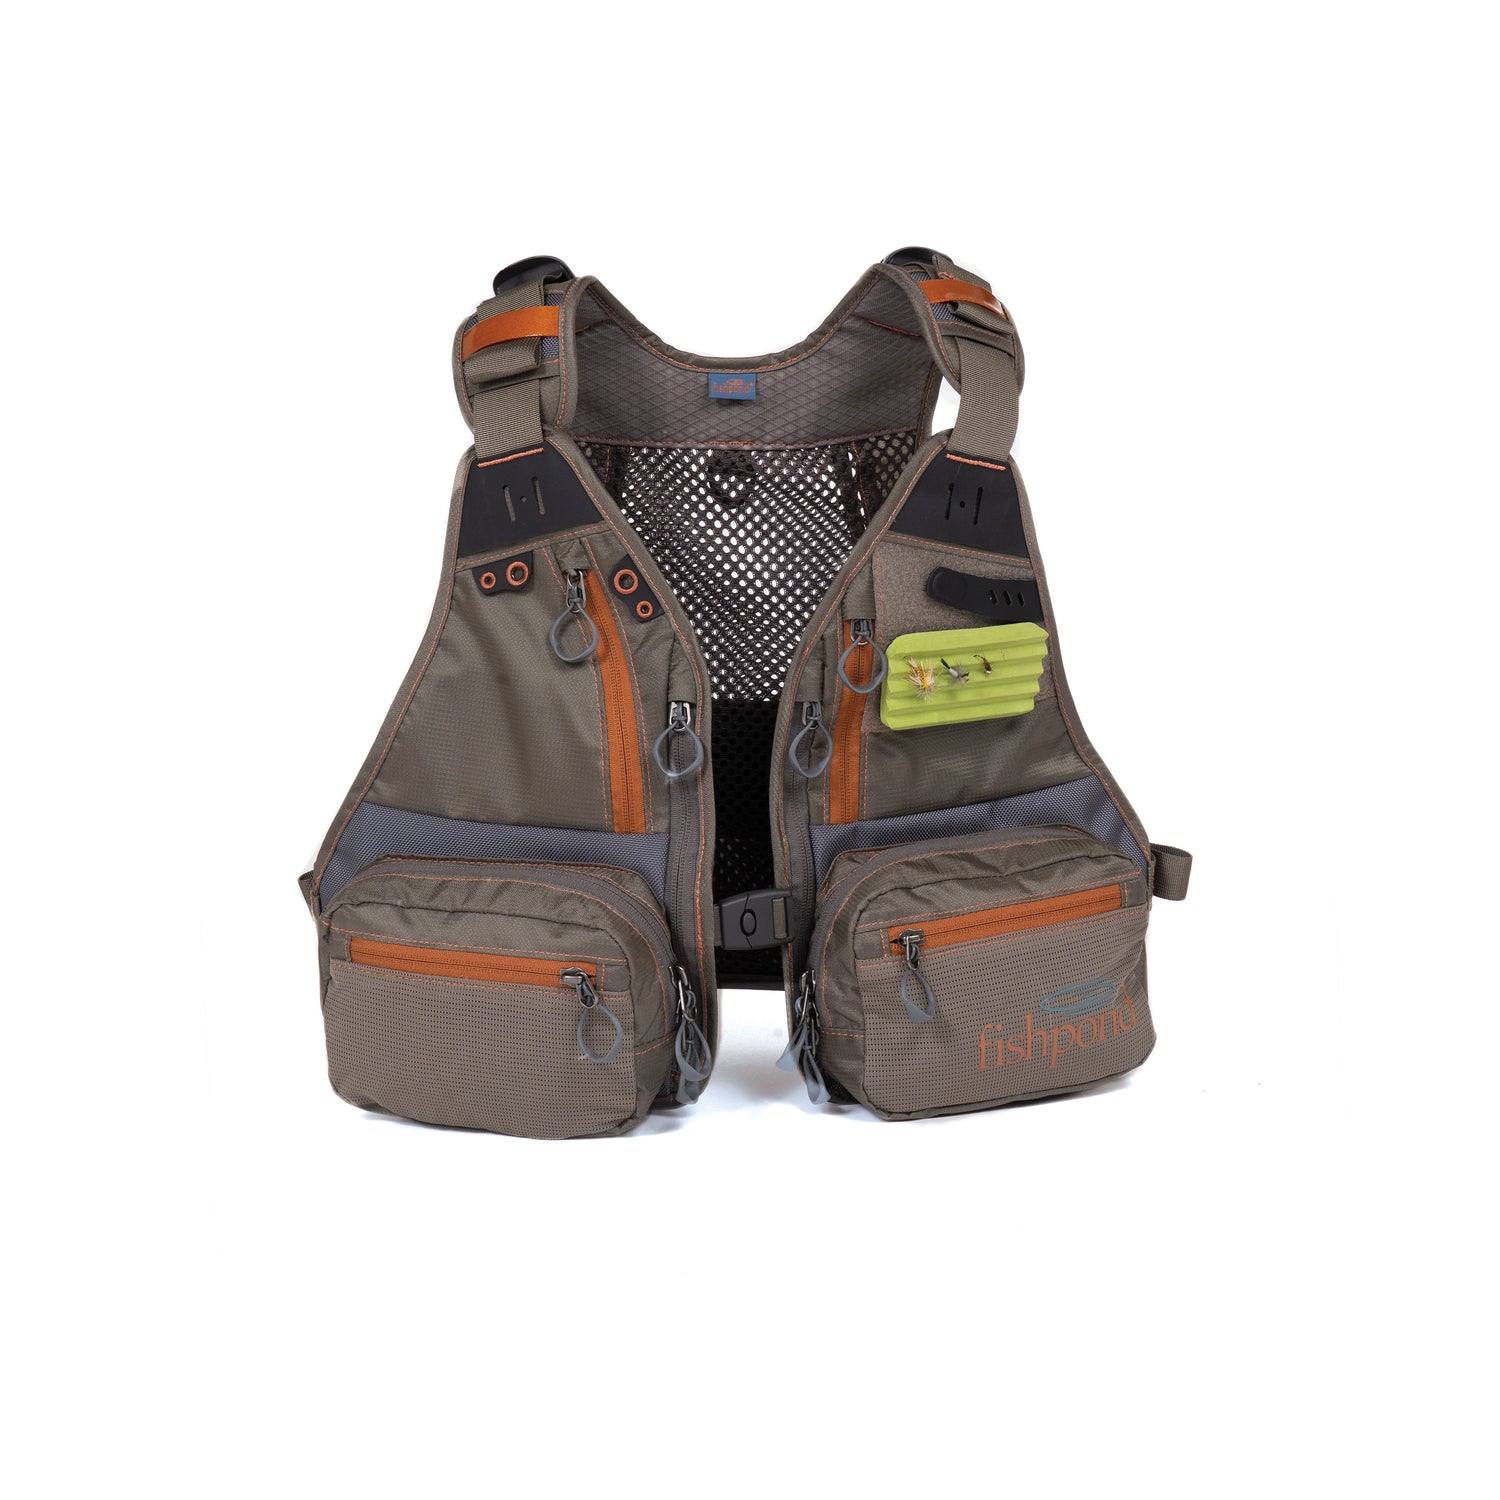 Tenderfoot Youth Vest  Fly Fishing – Fishpond